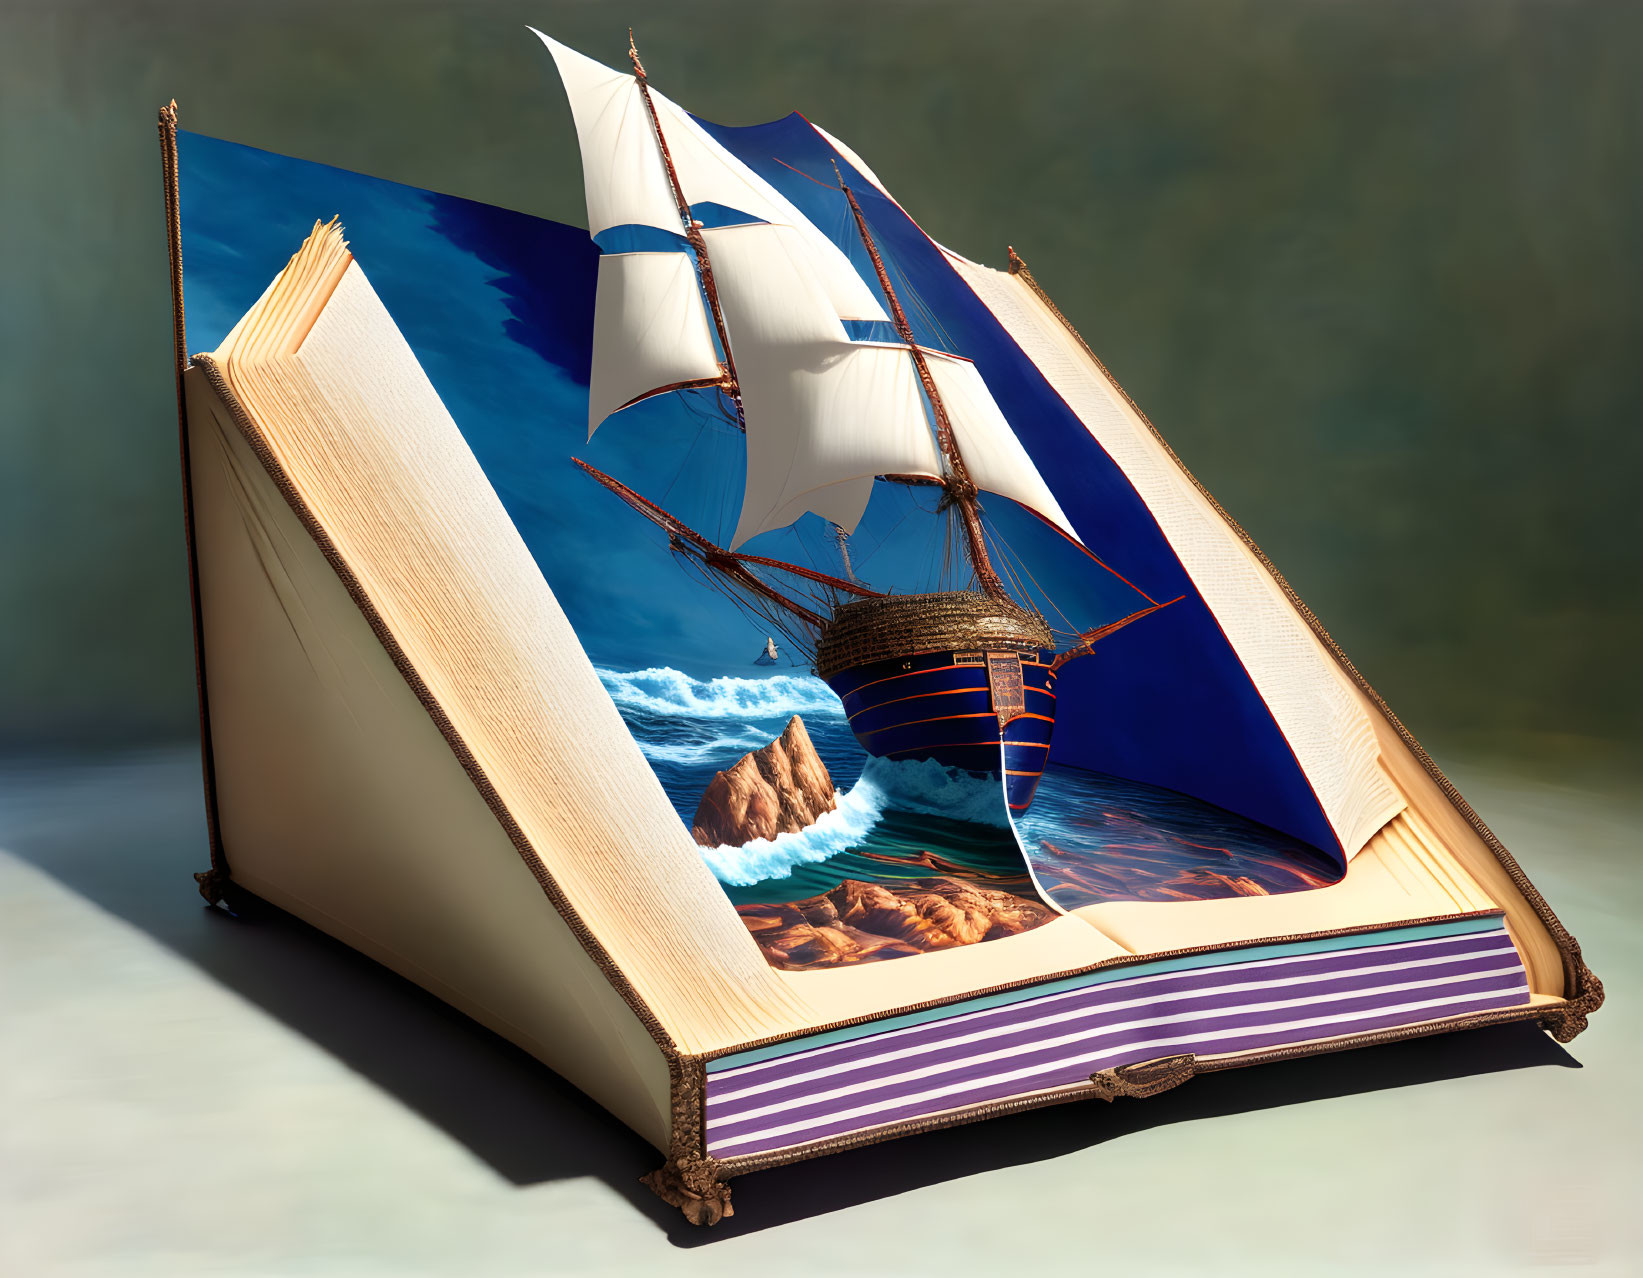 Ship coming out of a book